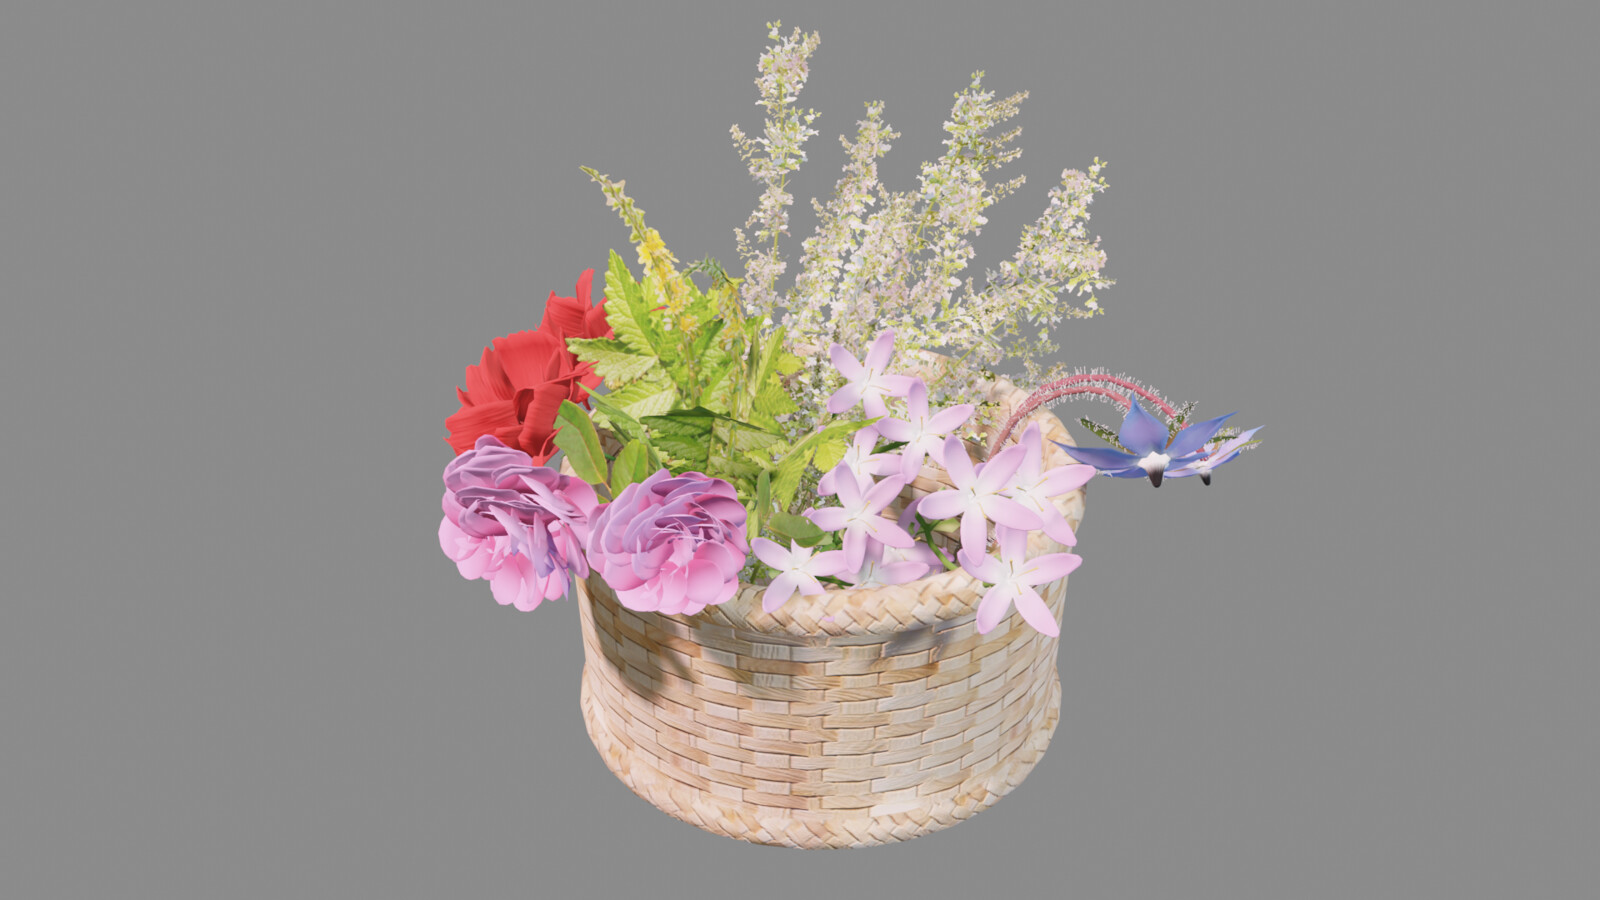 Render of the basket of herbs and flowers.